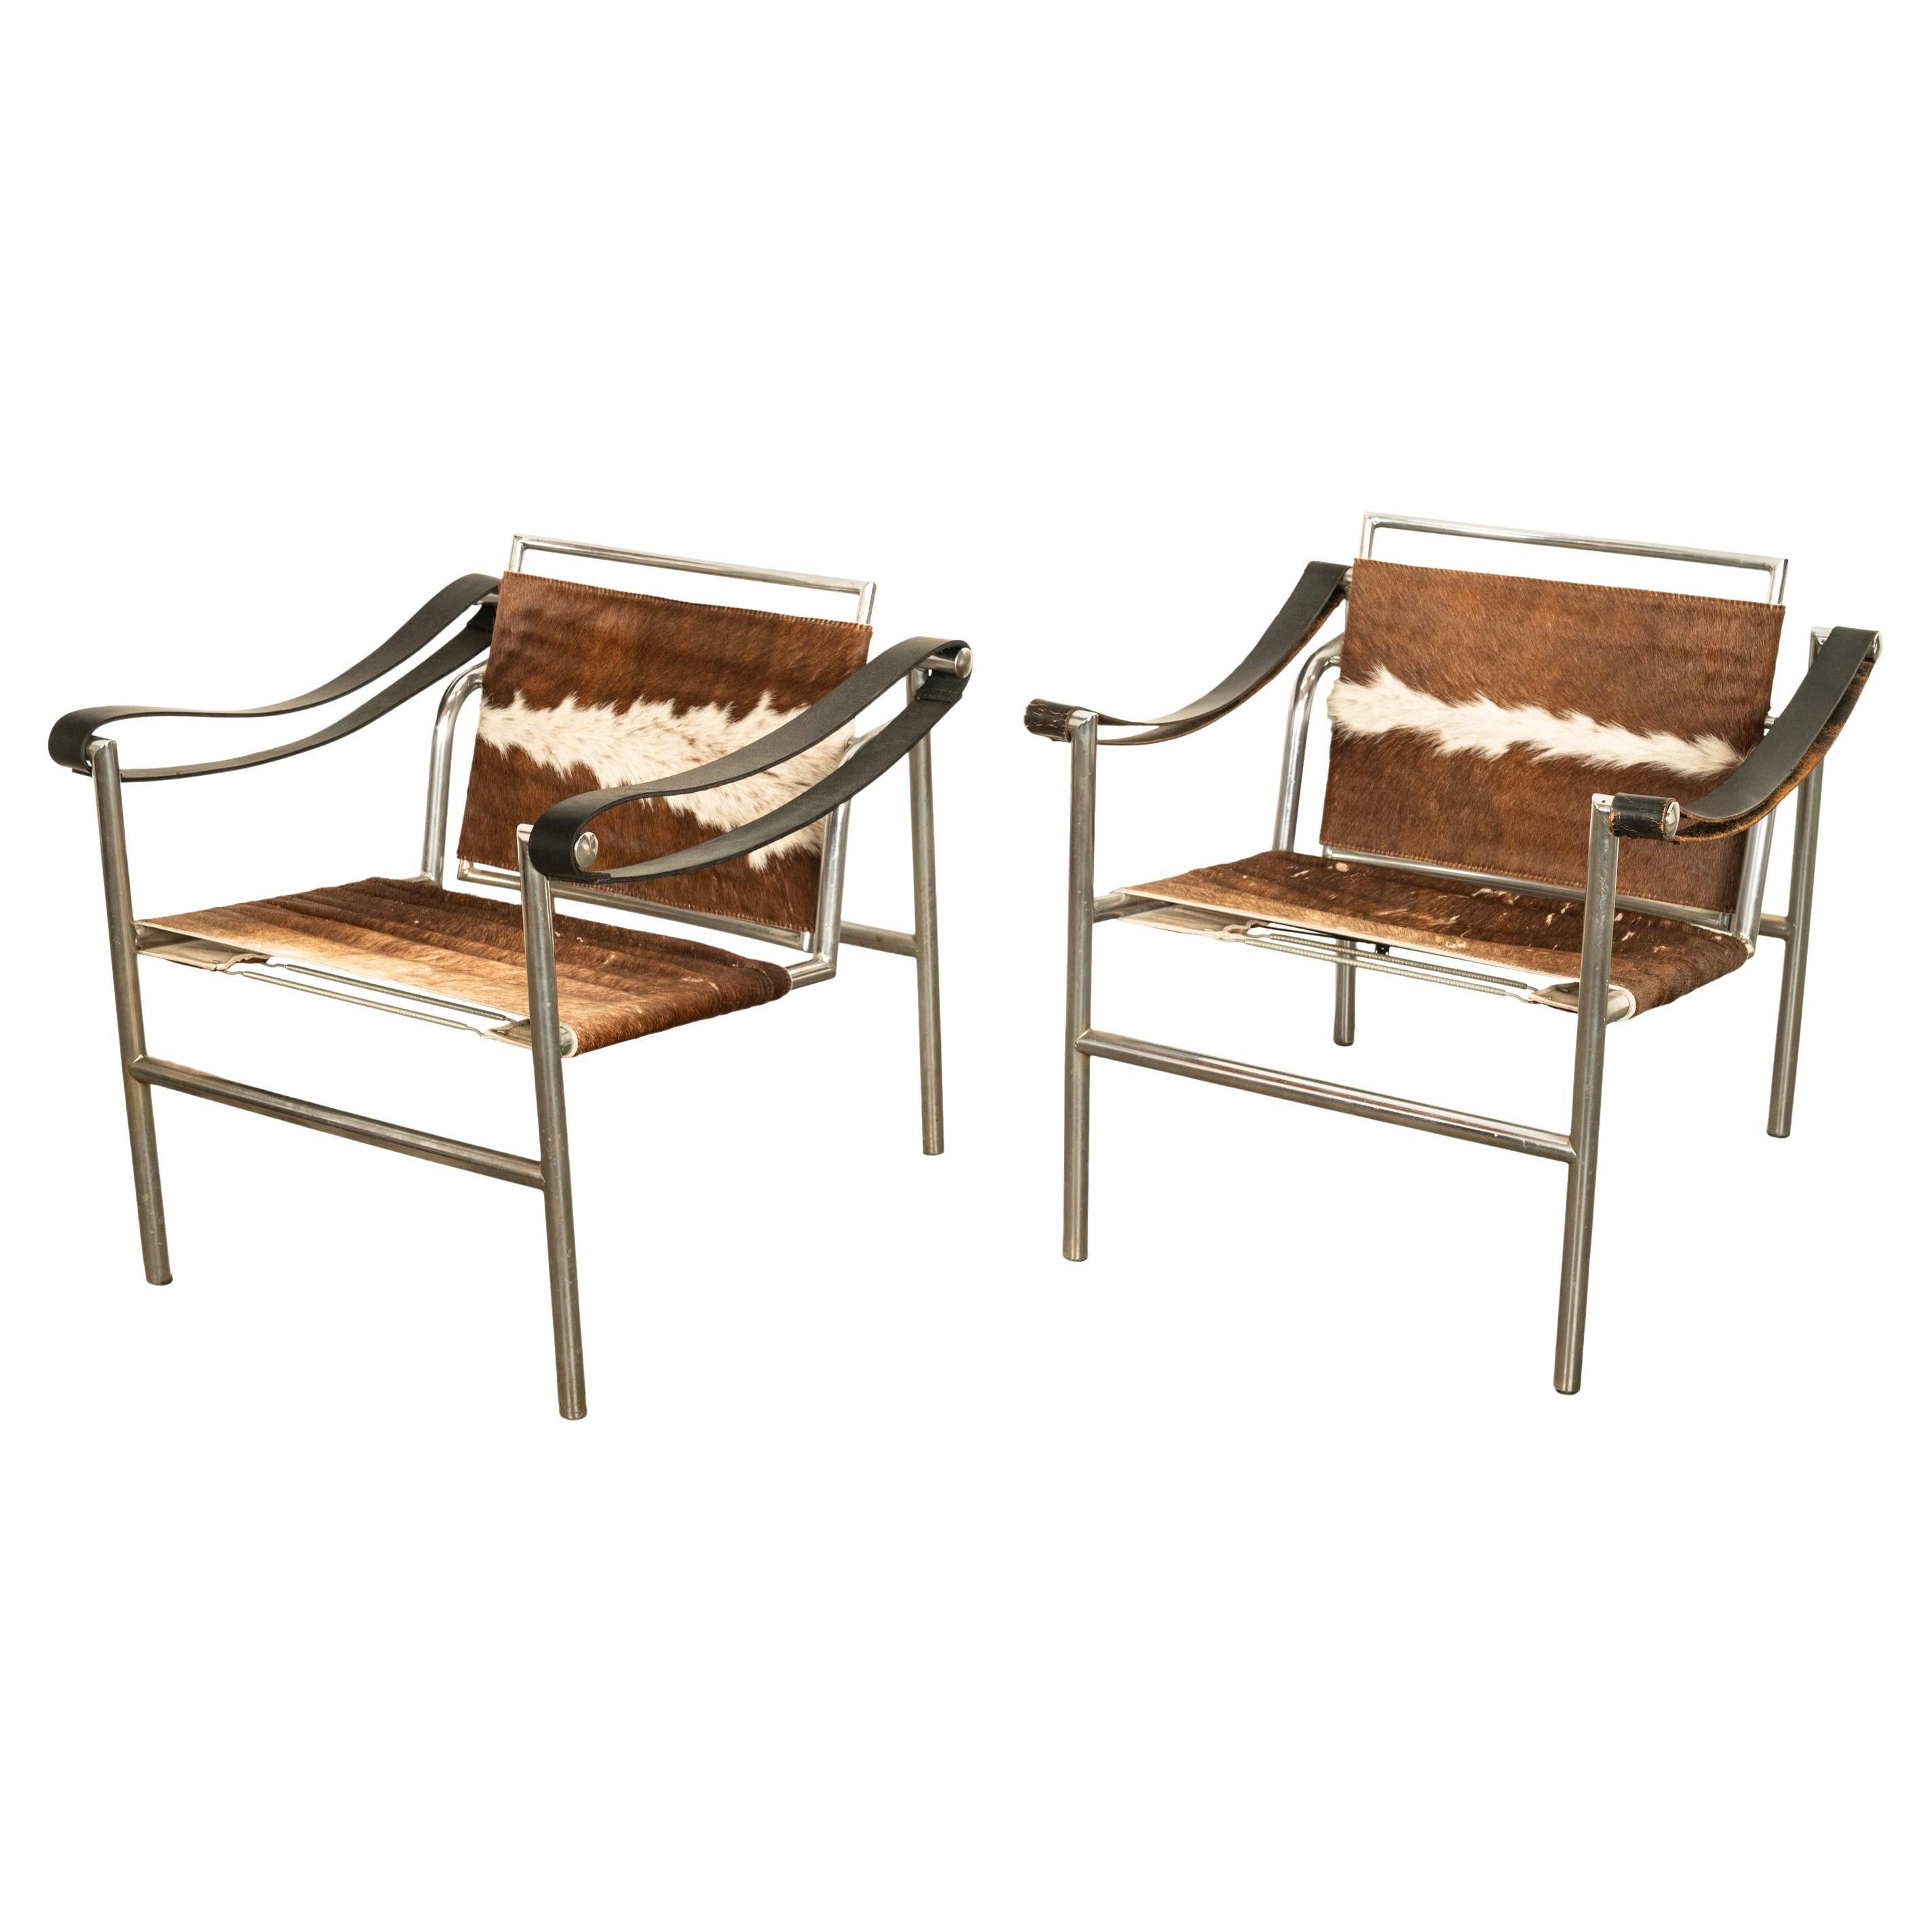 A very good pair of MCM Le Corbusier LC1 sling chairs, by Cassina, 1960's.
This iconic design was designed in the Bauhaus through the collaboration of Le Corbusier and Charlotte Perriand in 1929.
This pair are early production made under licence by